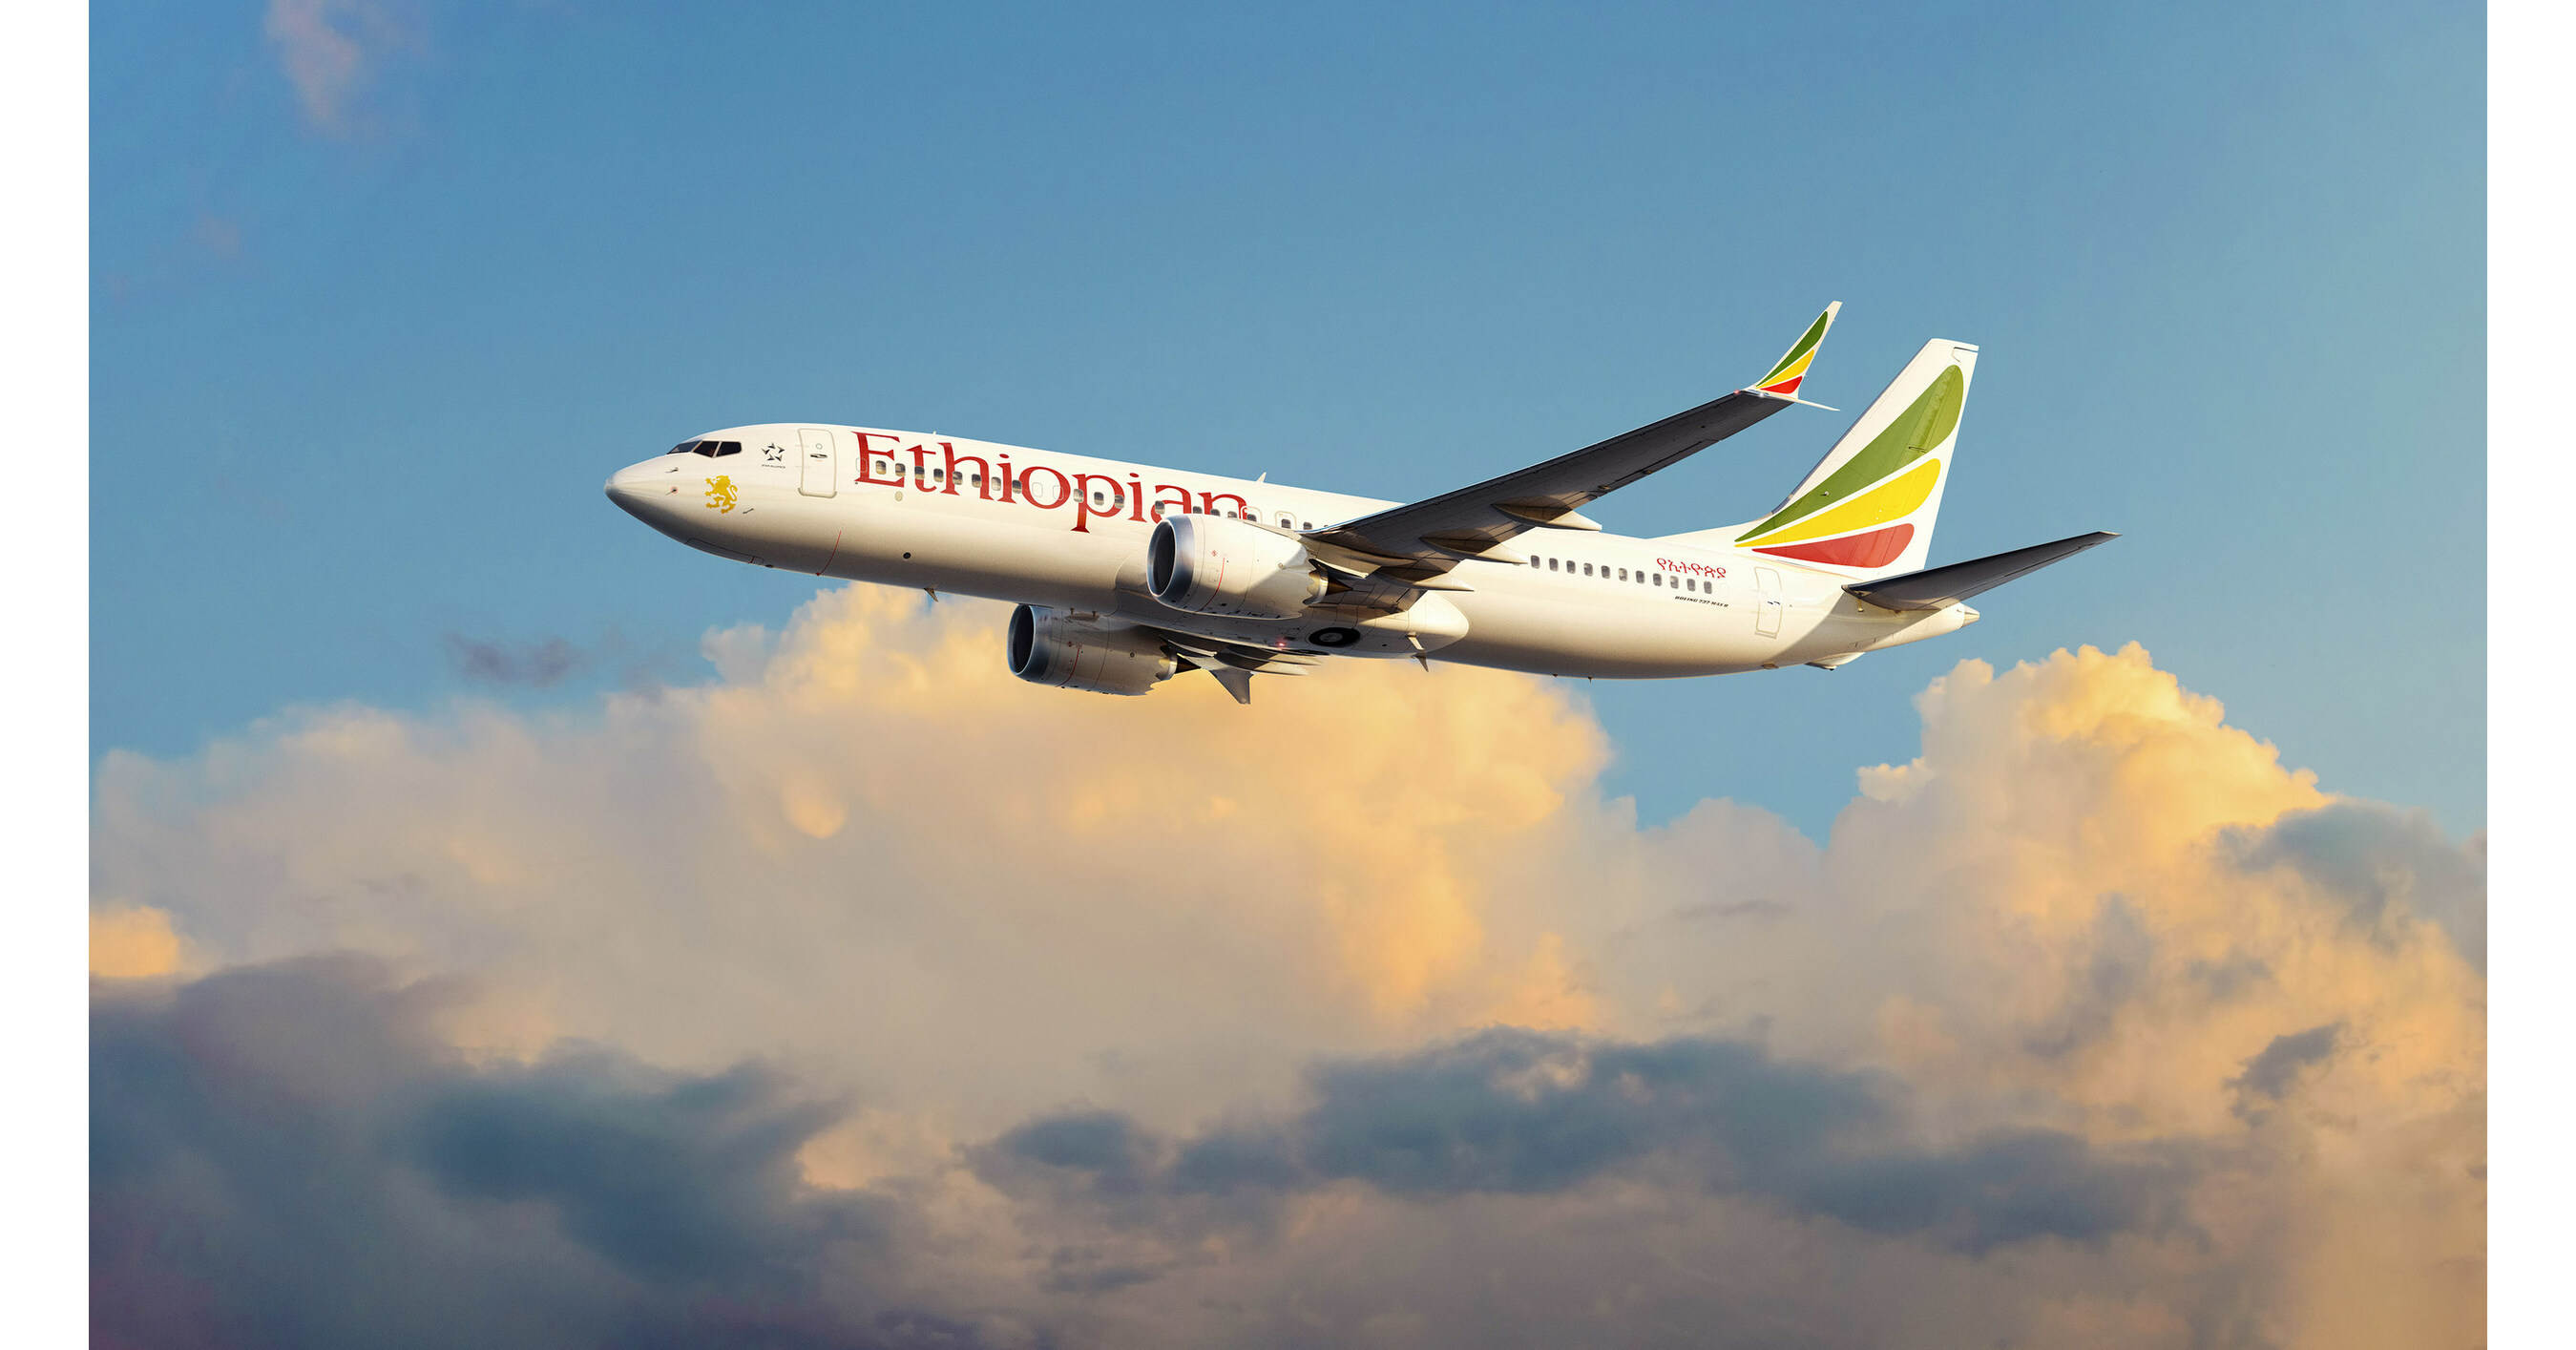 Ethiopian Airlines Agrees to Landmark Order for Up to 67 Boeing Jets